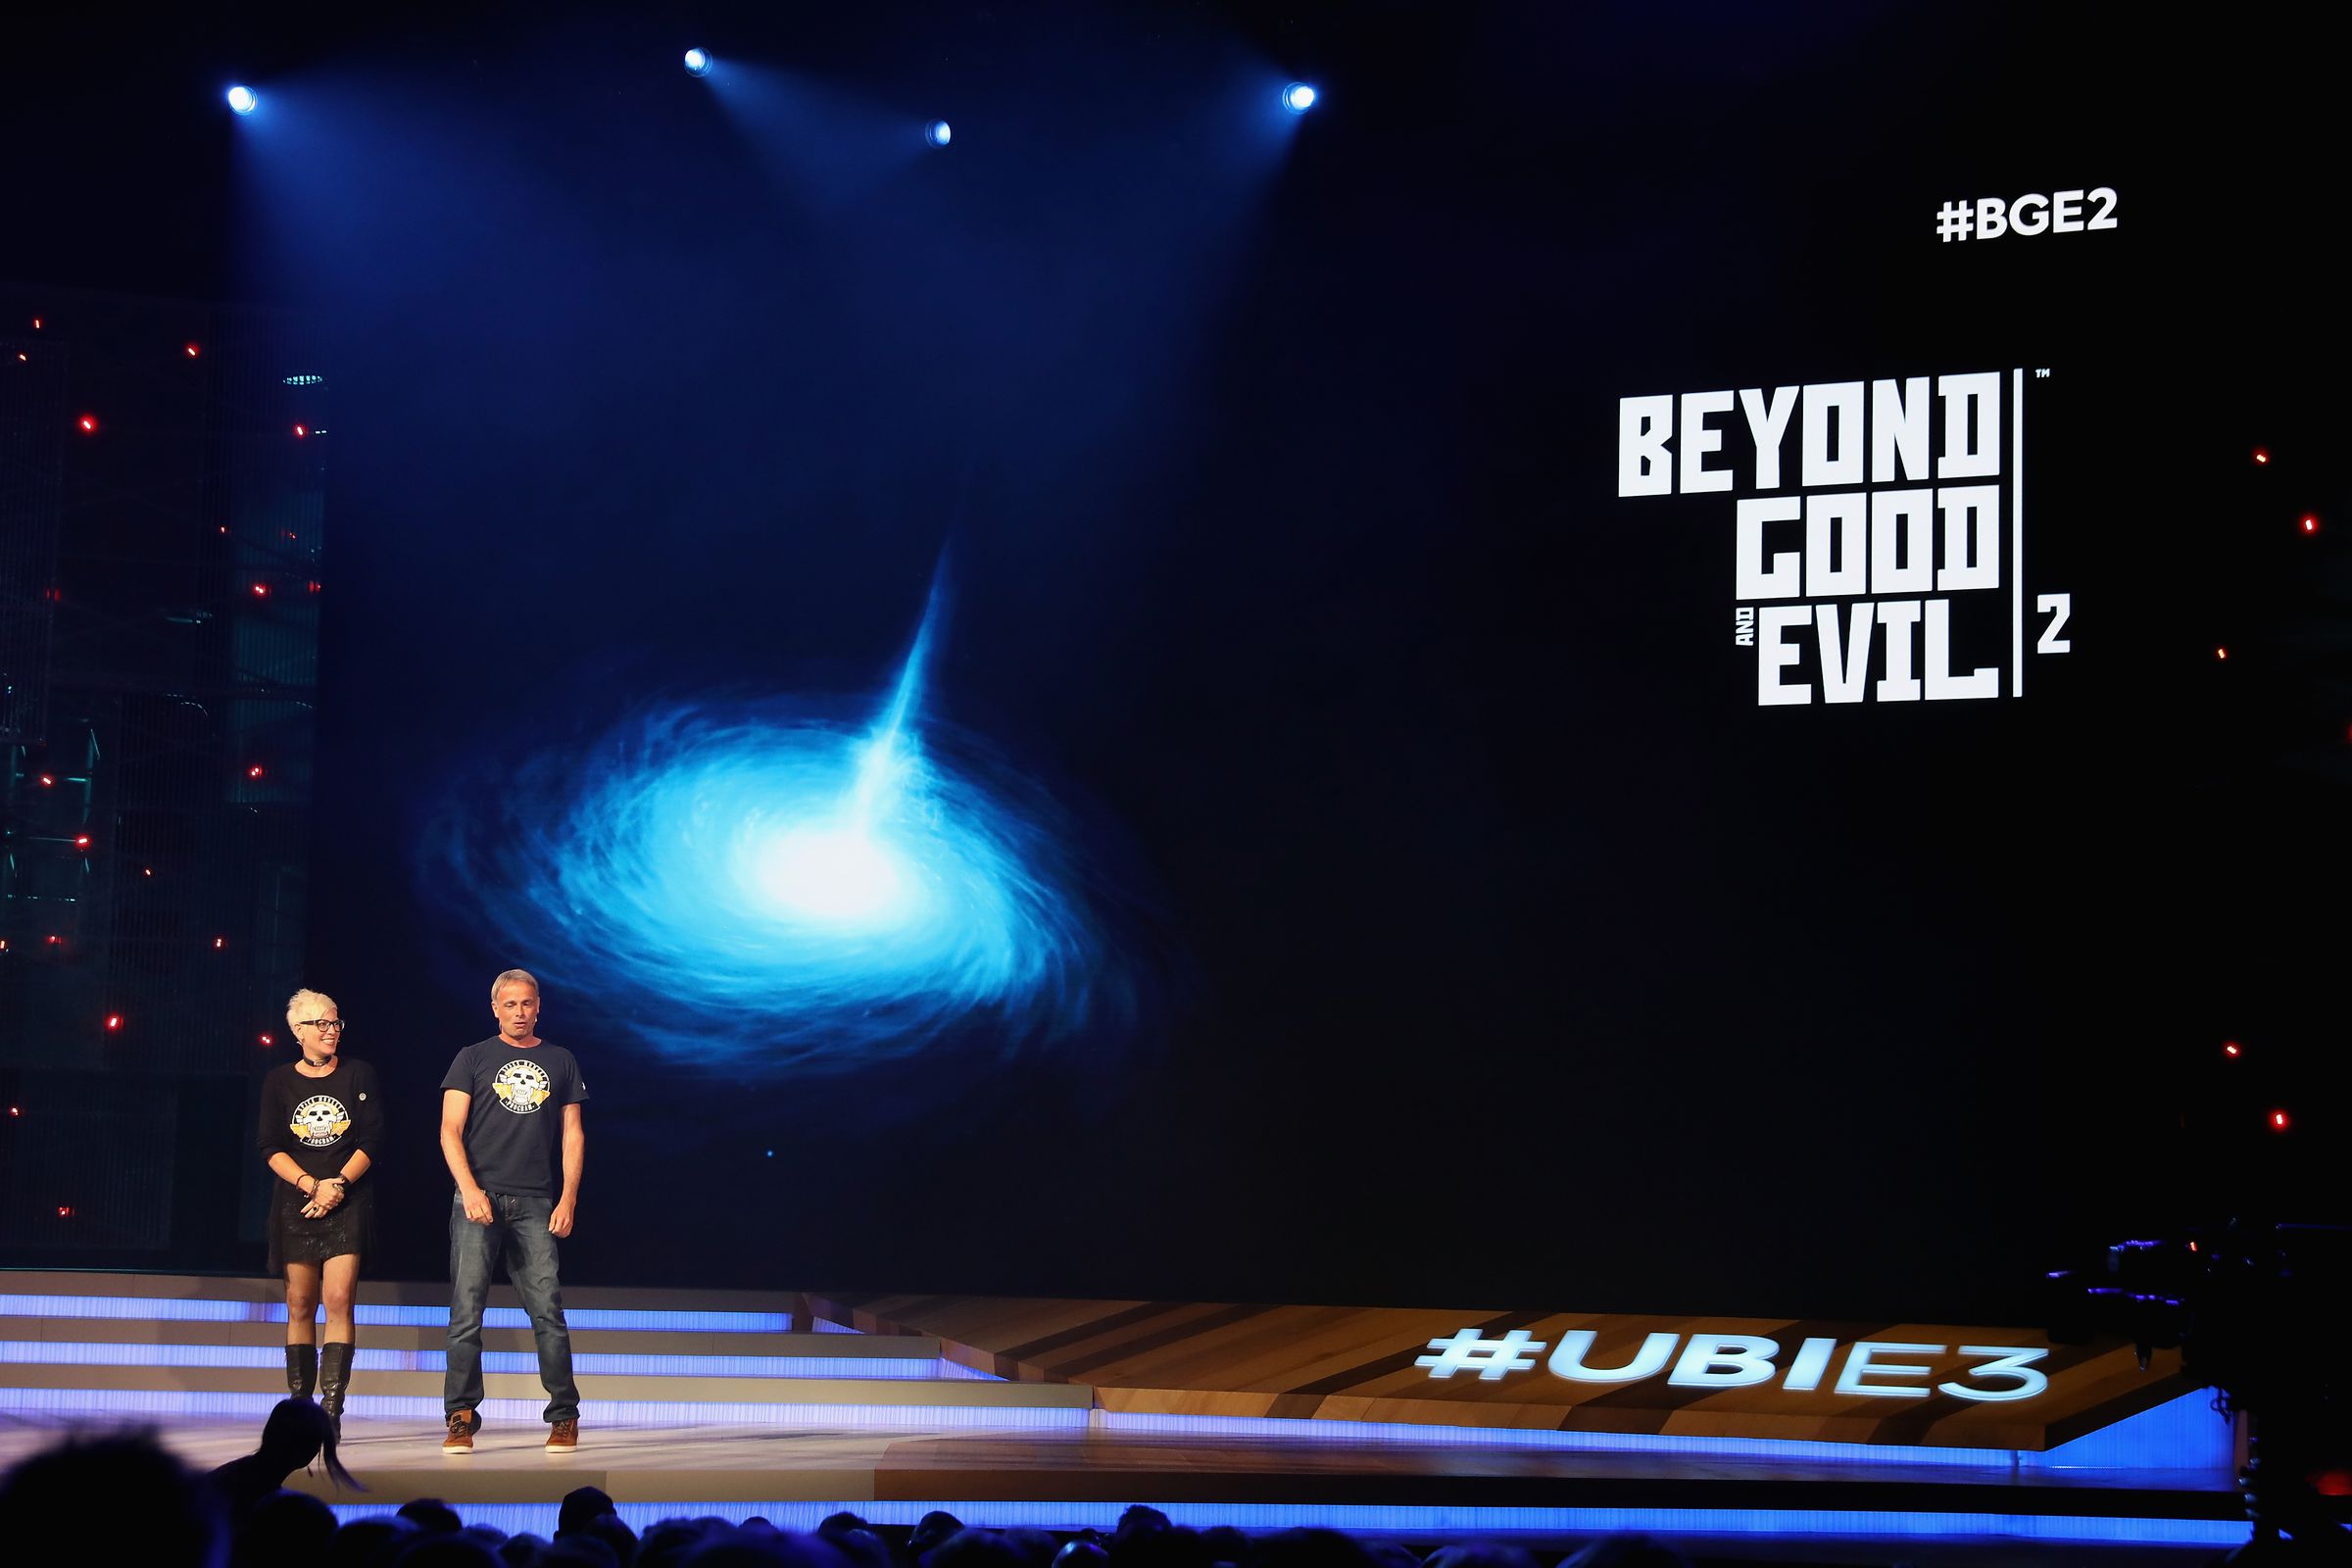 Ubisoft narrative director Gabrielle Shrager (left) and Ubisoft Montpellier Studio’s Michel Ancel introduce Beyond Good and Evil 2 during the Ubisoft E3 conference at the Orpheum Theater on June 12th, 2017, in Los Angeles, California. 